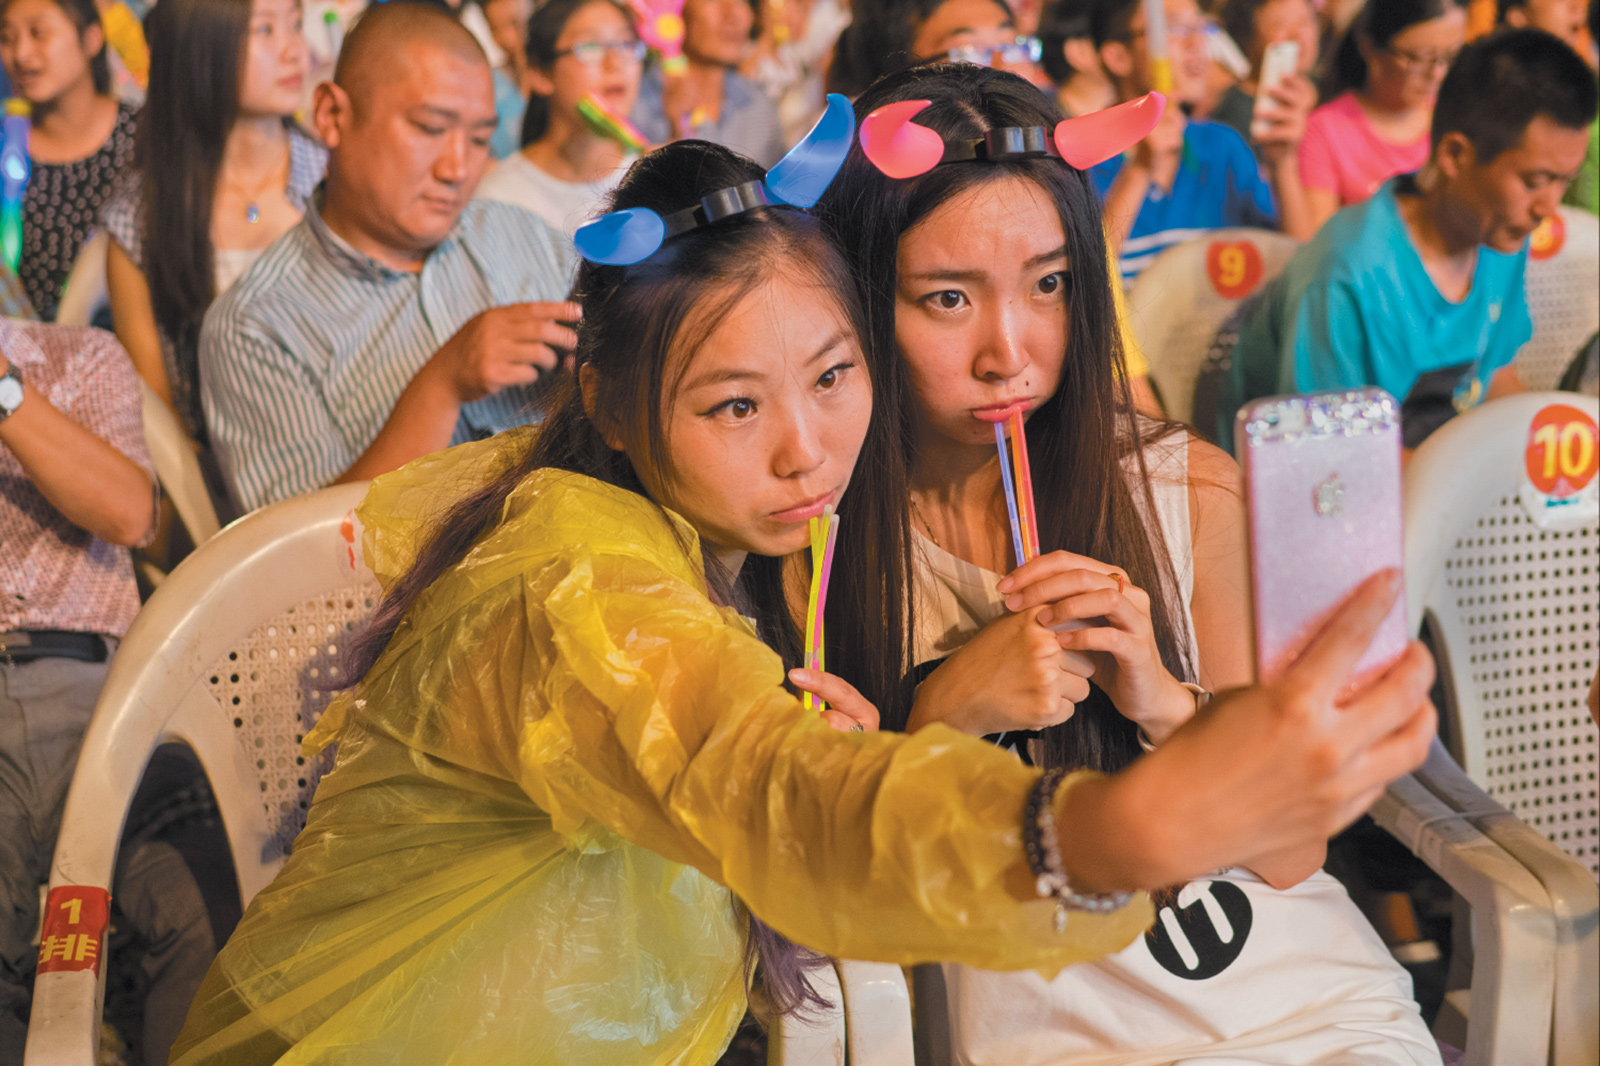 Attendees of the Qingdao International Beer Festival taking a selfie with a smartphone, Shandong province, China, August 2015